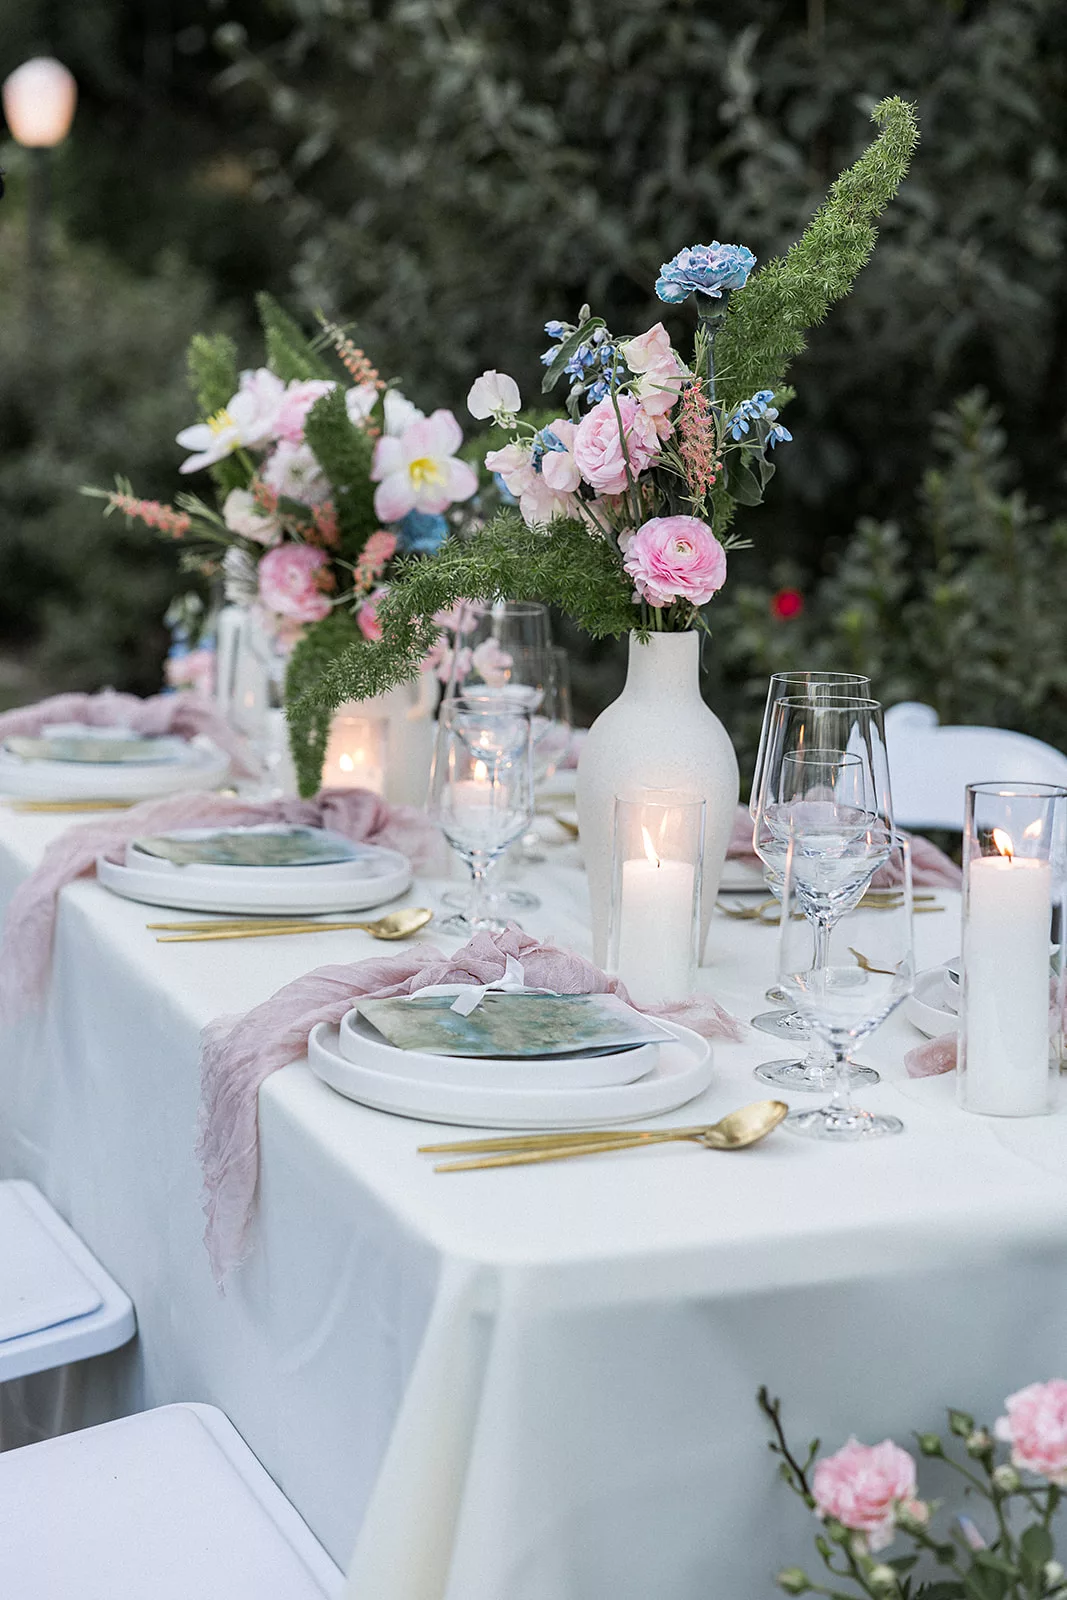 Details of a table setting with pink and blue florals/linens and gold silverware at an outdoor Wildflower 301 wedding reception